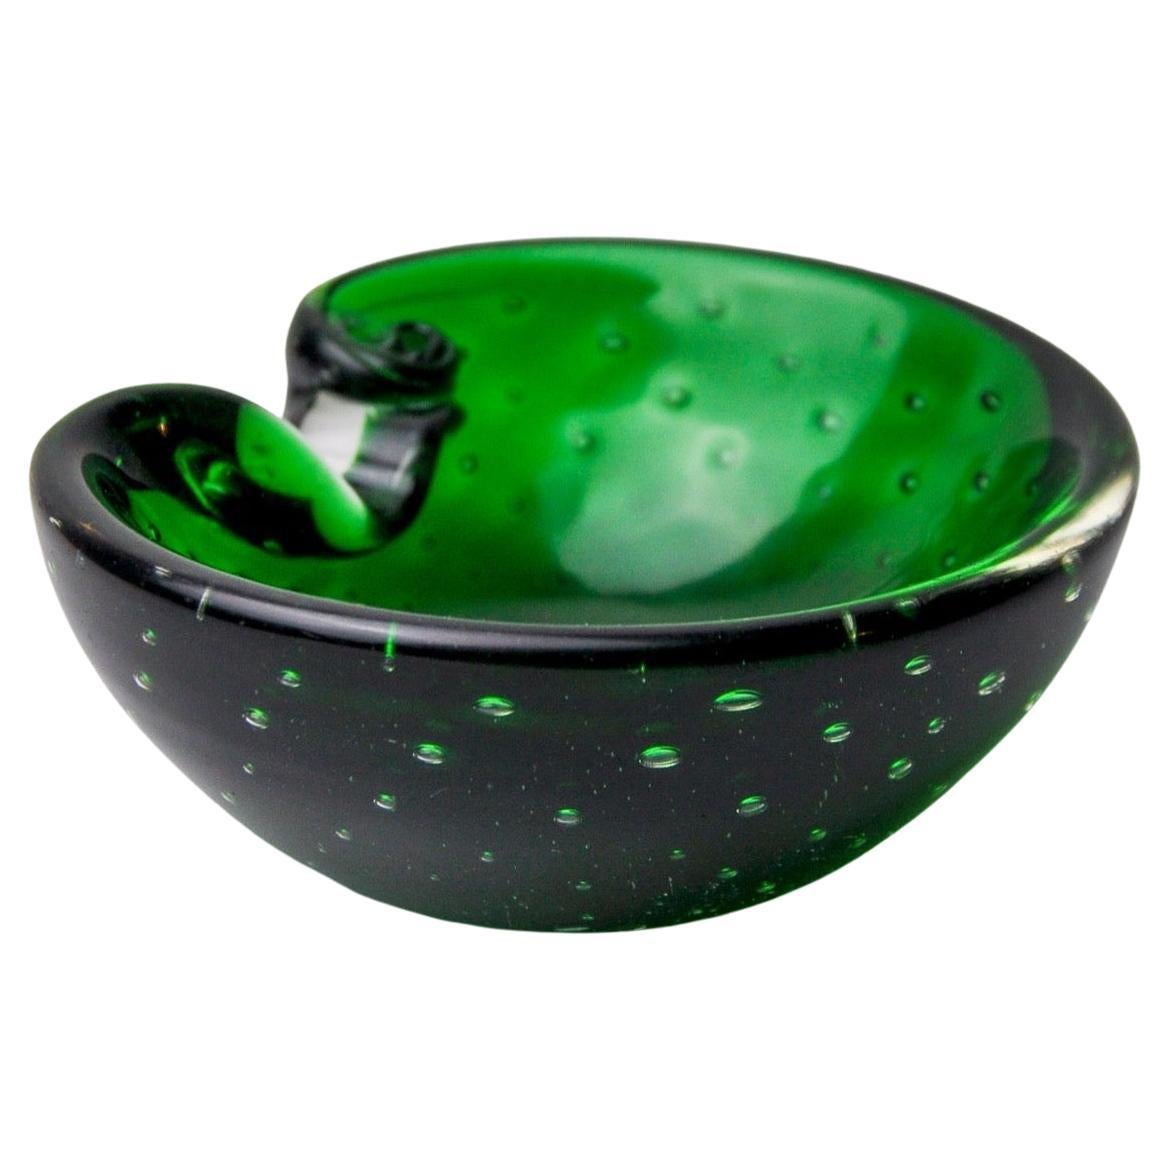 Sommerso cactus ashtray by Seguso, Murano glass, Italy, 1970 For Sale